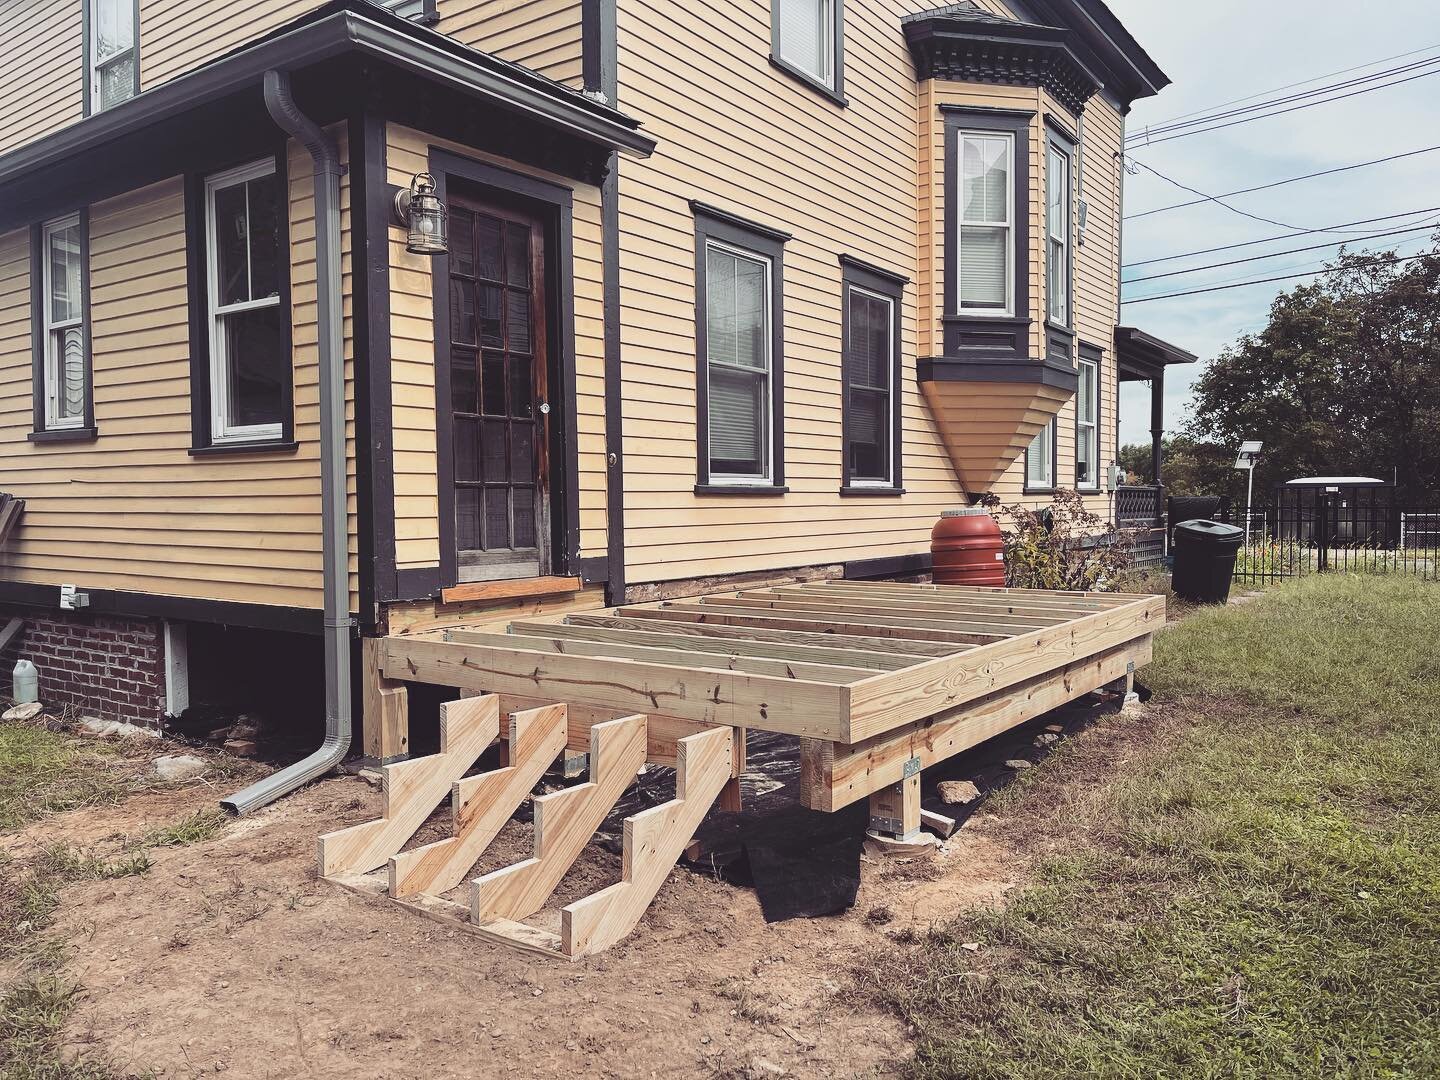 Next week, Gordon and Nevin return from their vacations, and they&rsquo;ll be back just in time to trim out this deck. Many thanks to Casey Parsons for his help setting beams and running joists.